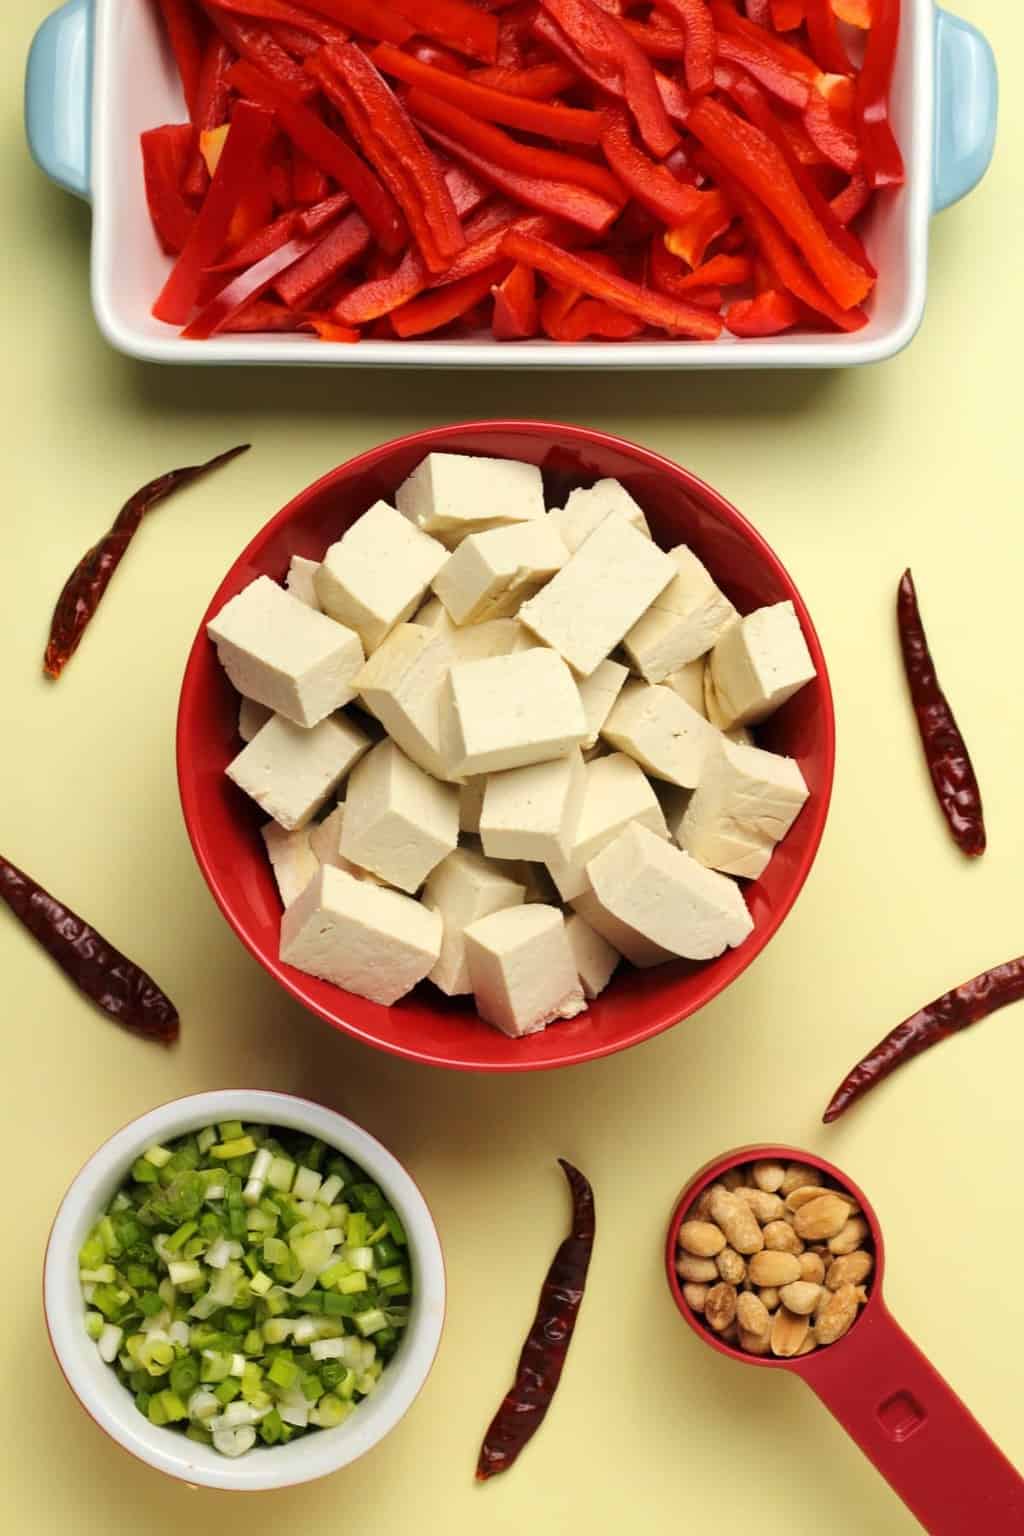 Ingredients for kung pao tofu, cubes of tofu in a bowl, sliced red peppers, dried chilies, chopped spring onion and roasted salted peanuts.